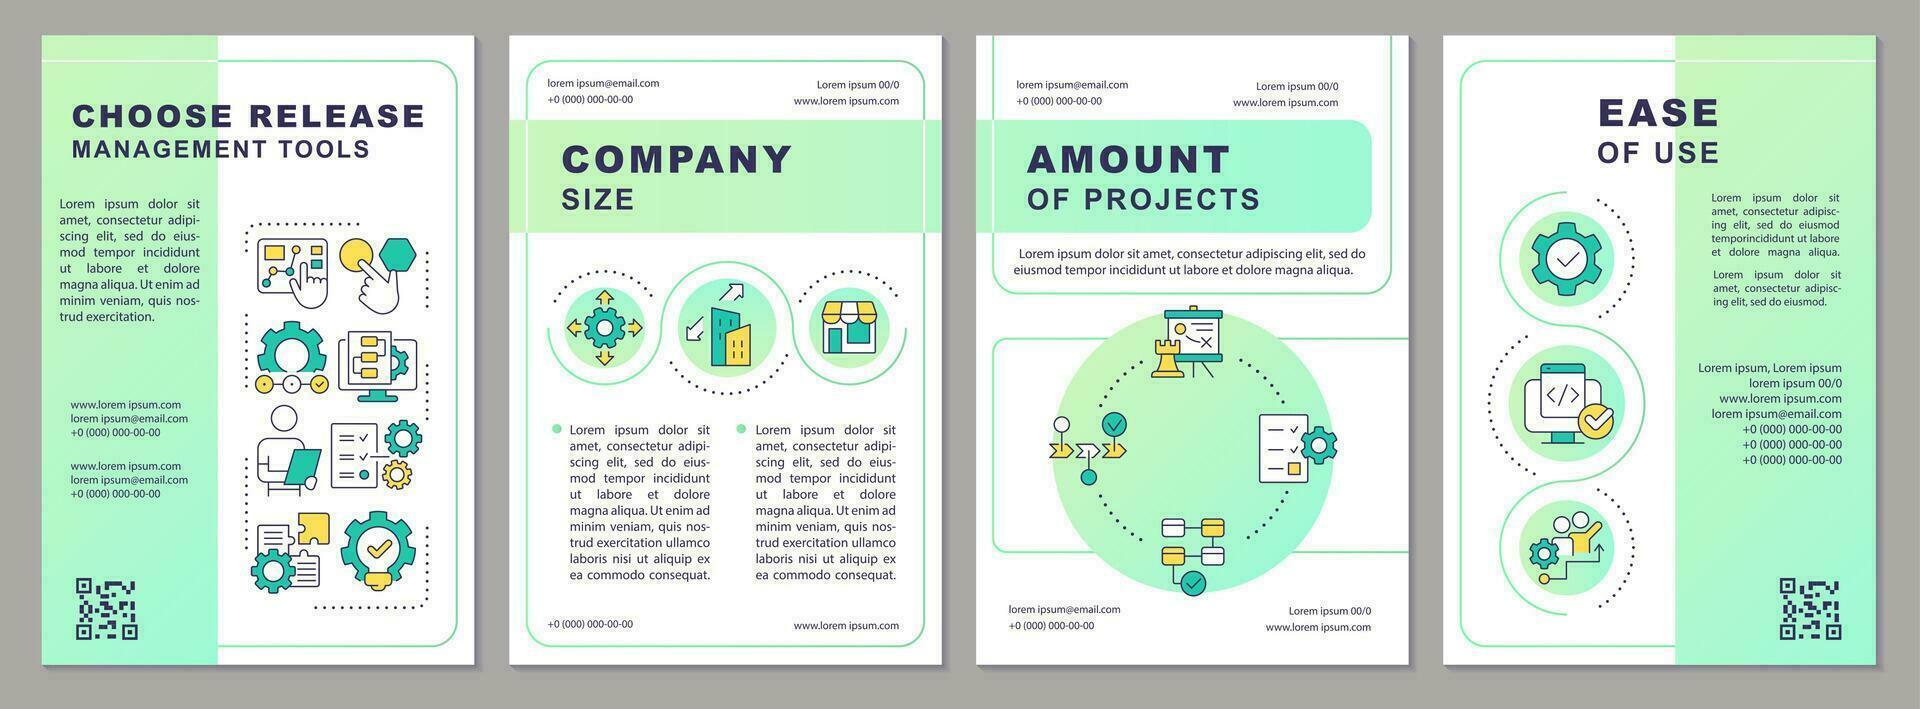 Picking release management instrumentation brochure template. Leaflet design with linear icons. Editable 4 vector layouts for presentation, annual reports